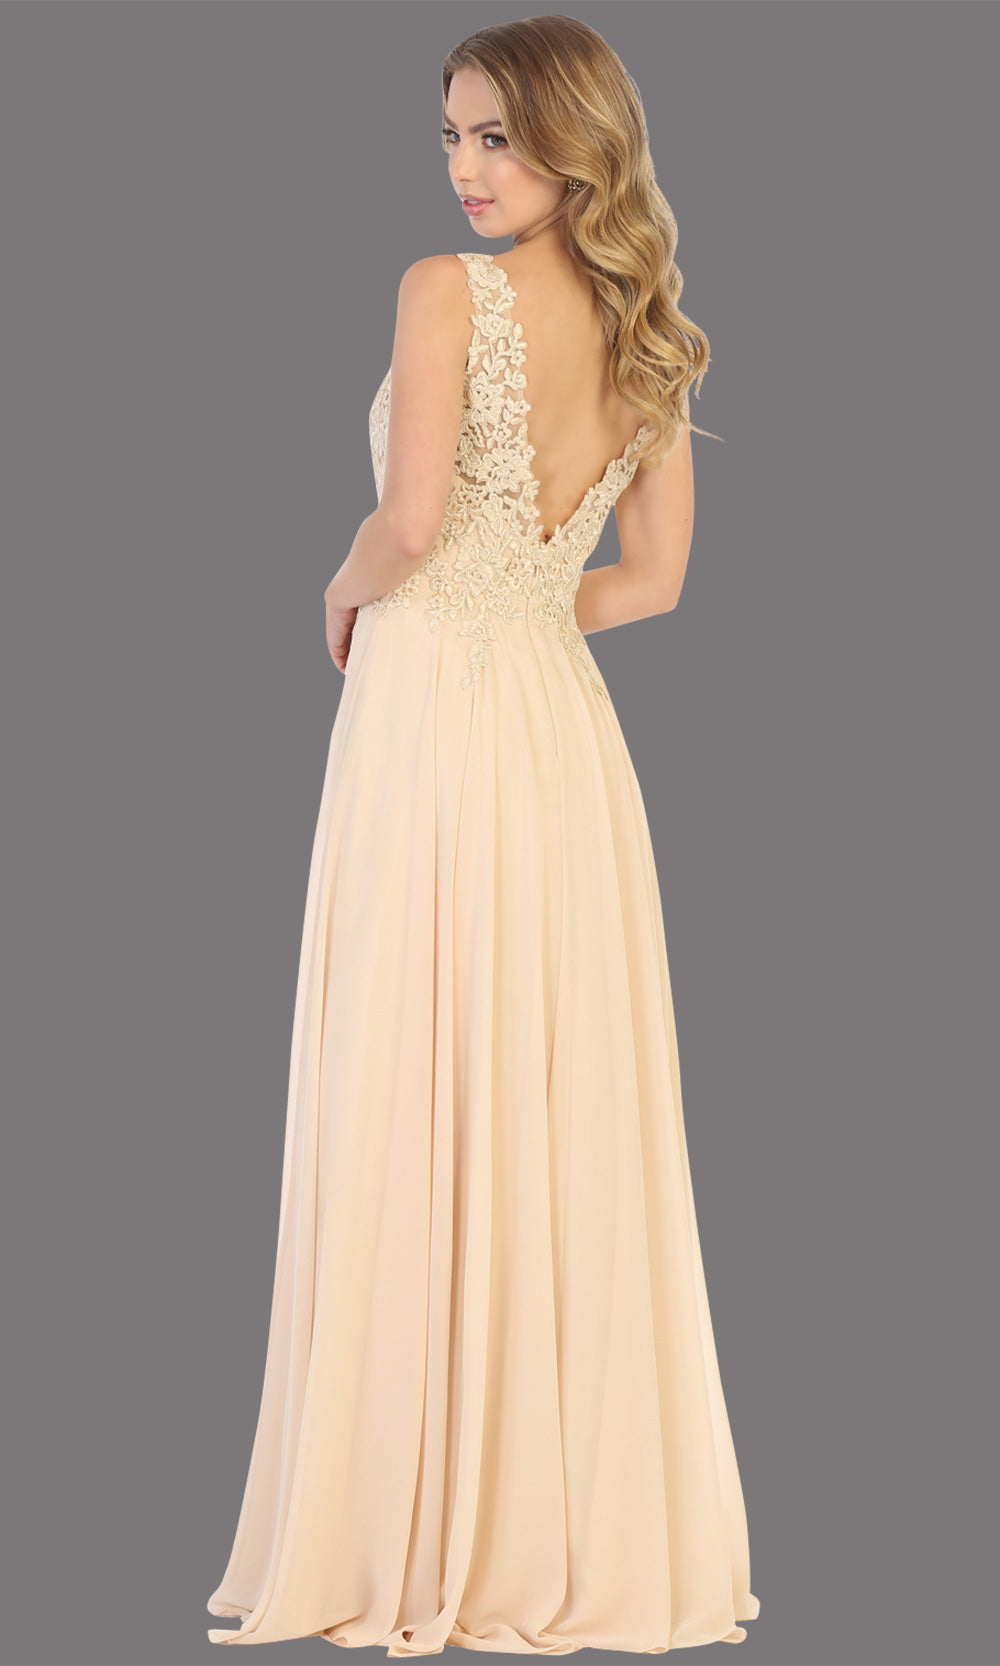 Mayqueen MQ1754 long champagne gold flowy sleek & sexy dress w/straps. This light gold dress is perfect for bridesmaid dresses, simple wedding guest dress, prom dress, gala, black tie wedding. Plus sizes are available, evening party dress-b.jpg